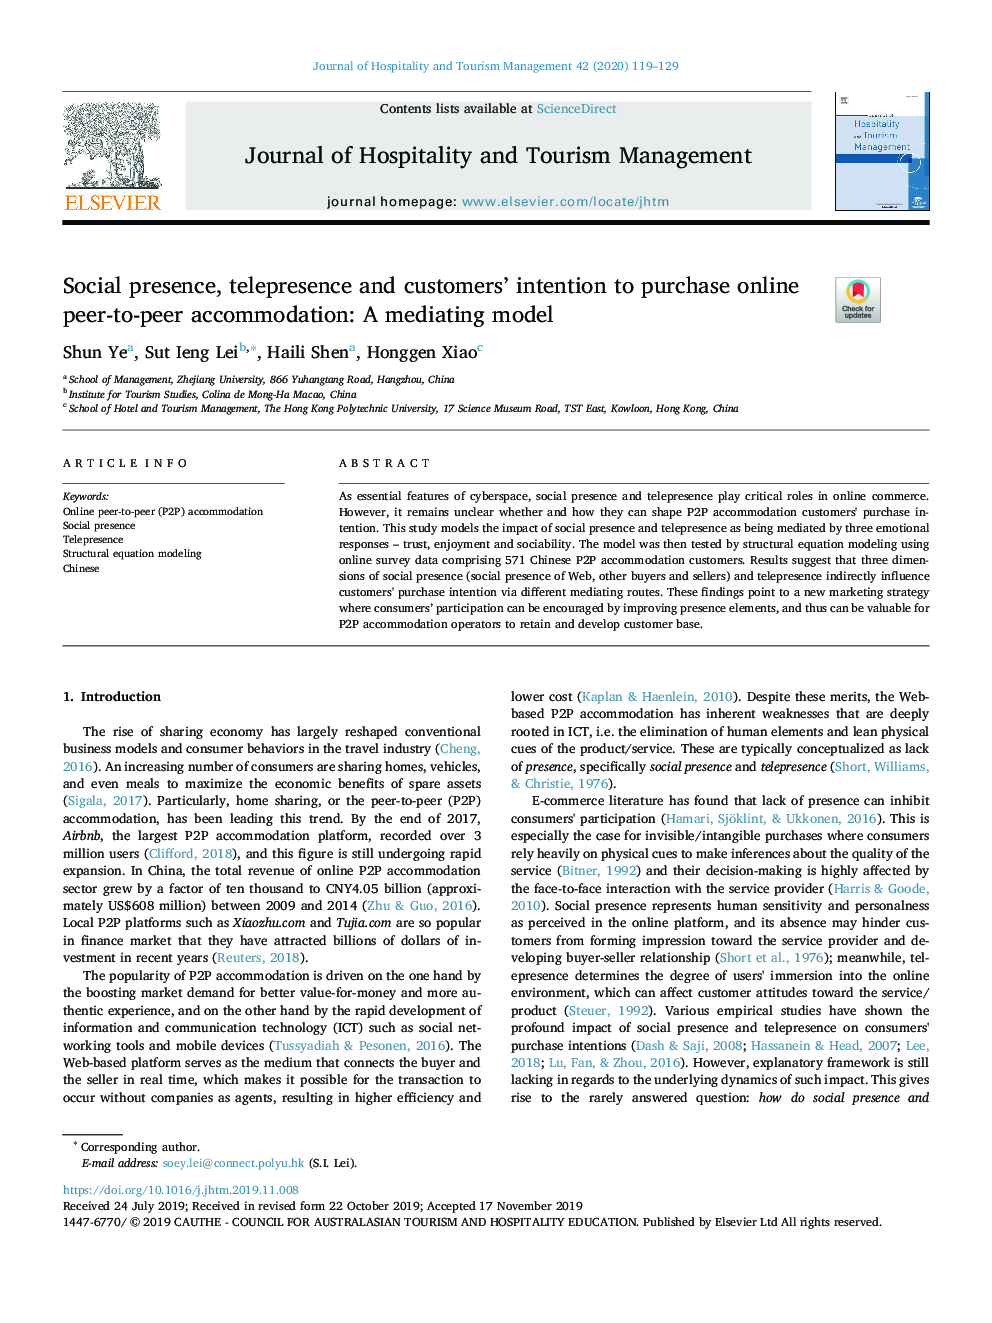 Social presence, telepresence and customers' intention to purchase online peer-to-peer accommodation: A mediating model